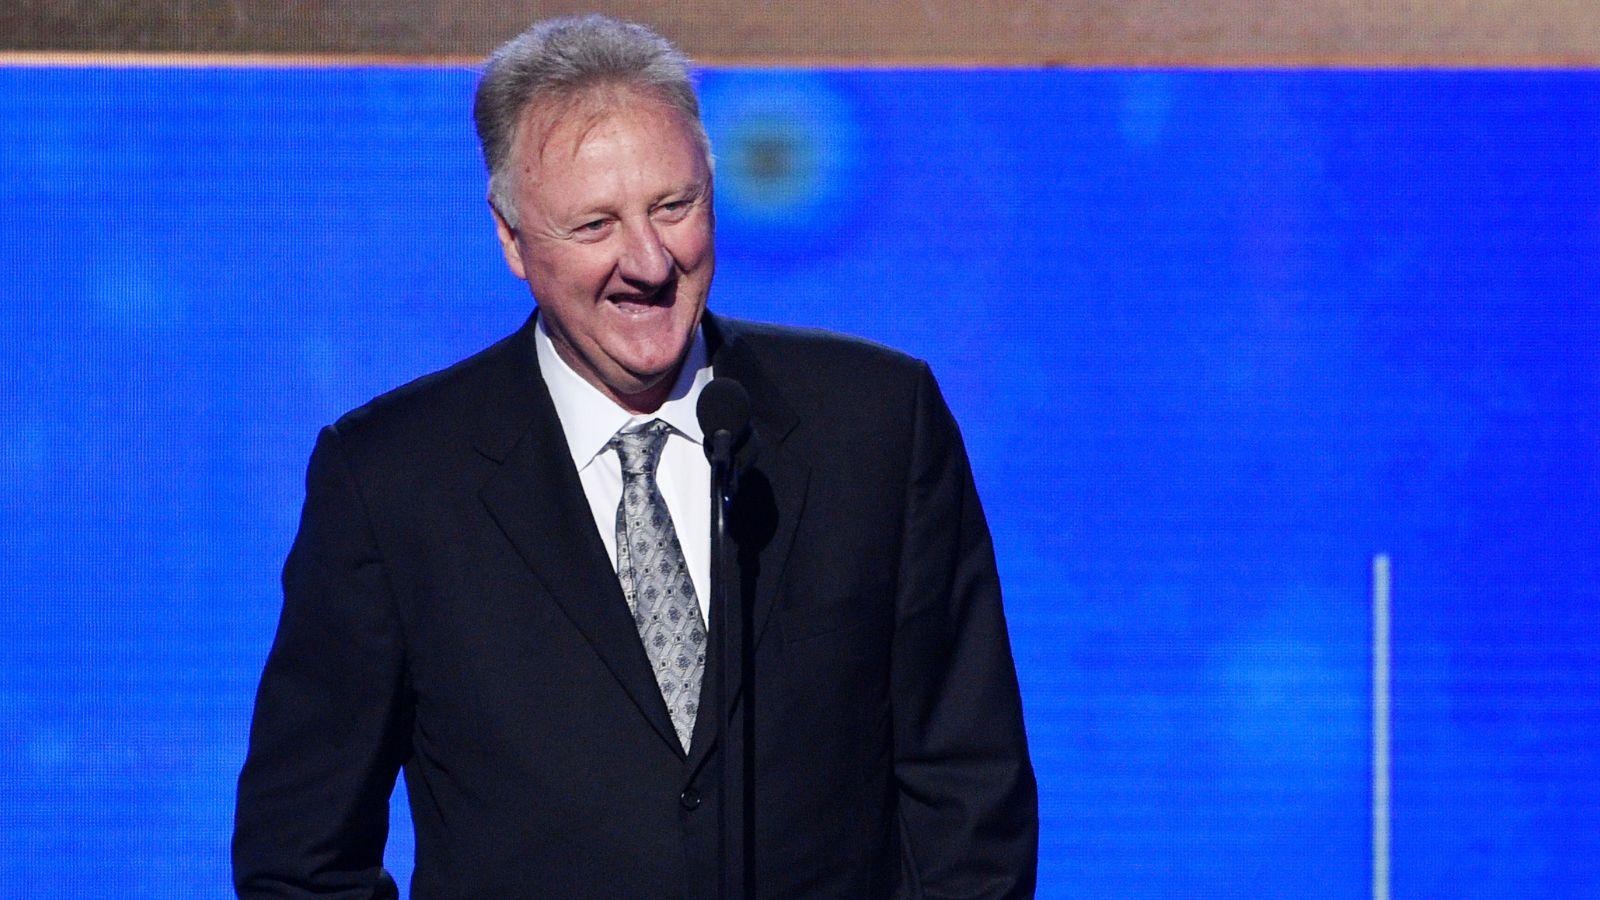 Larry Bird on stage at an award show.